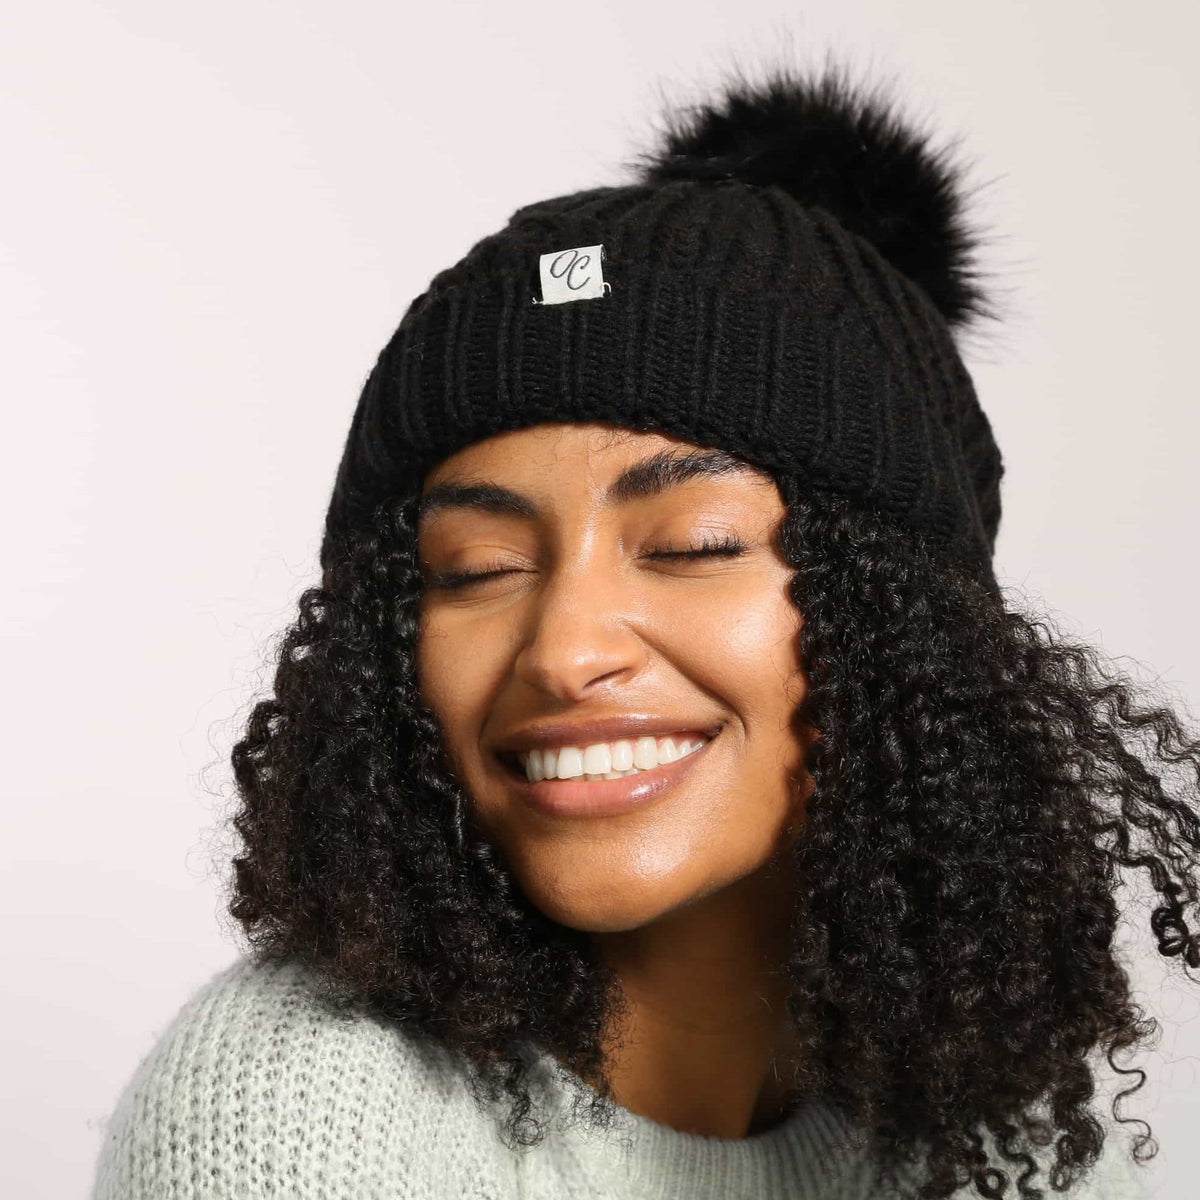 Only Curls Satin Lined Knitted Beanie Hat - Black with Pom Pom - Only Curls